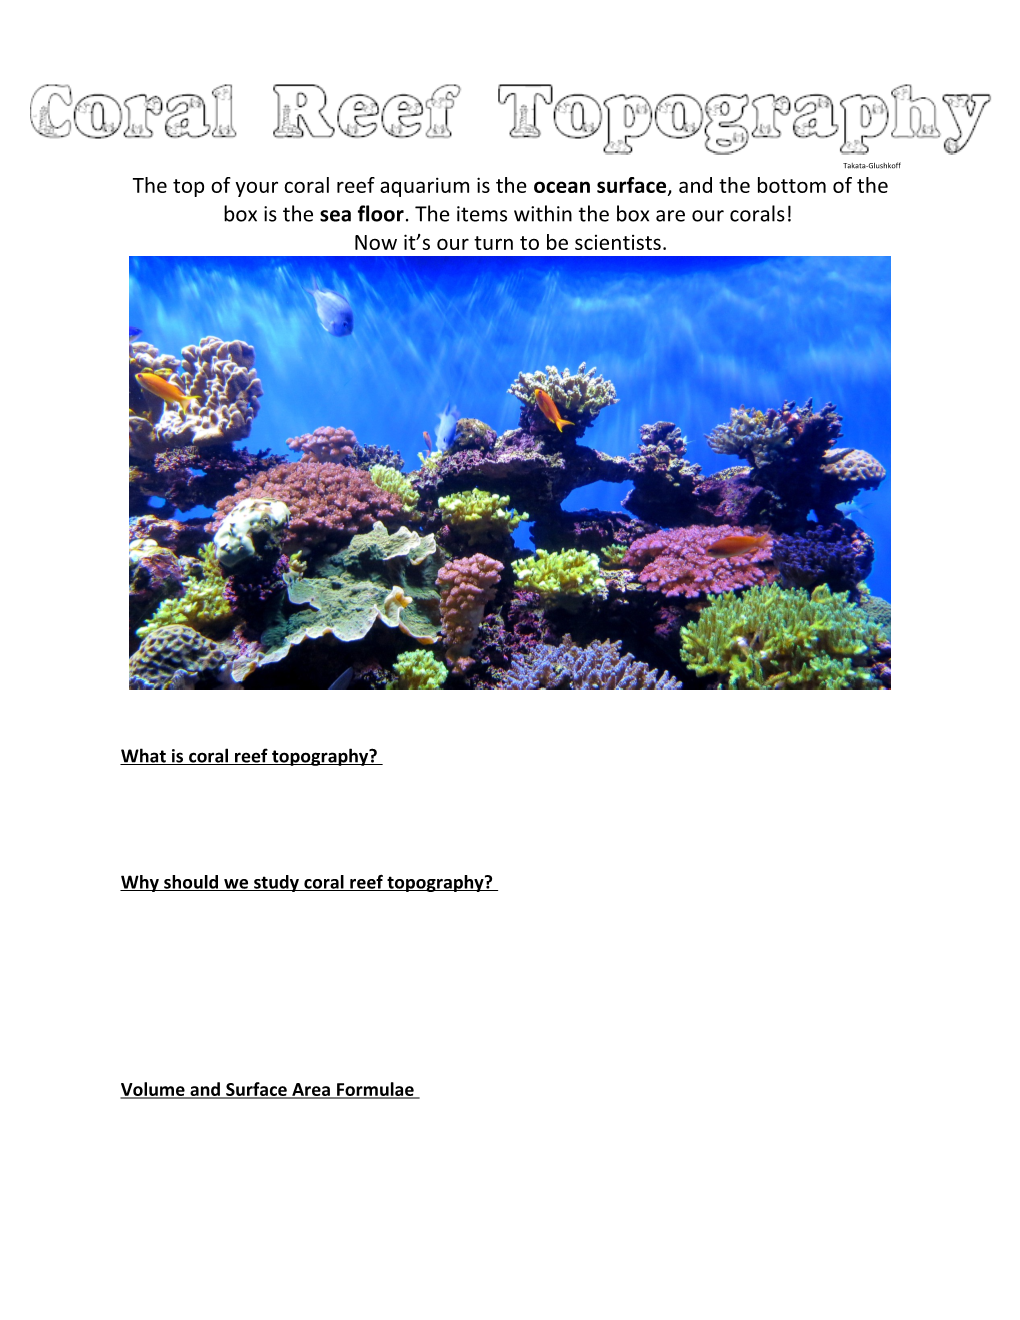 What Is Coral Reef Topography?